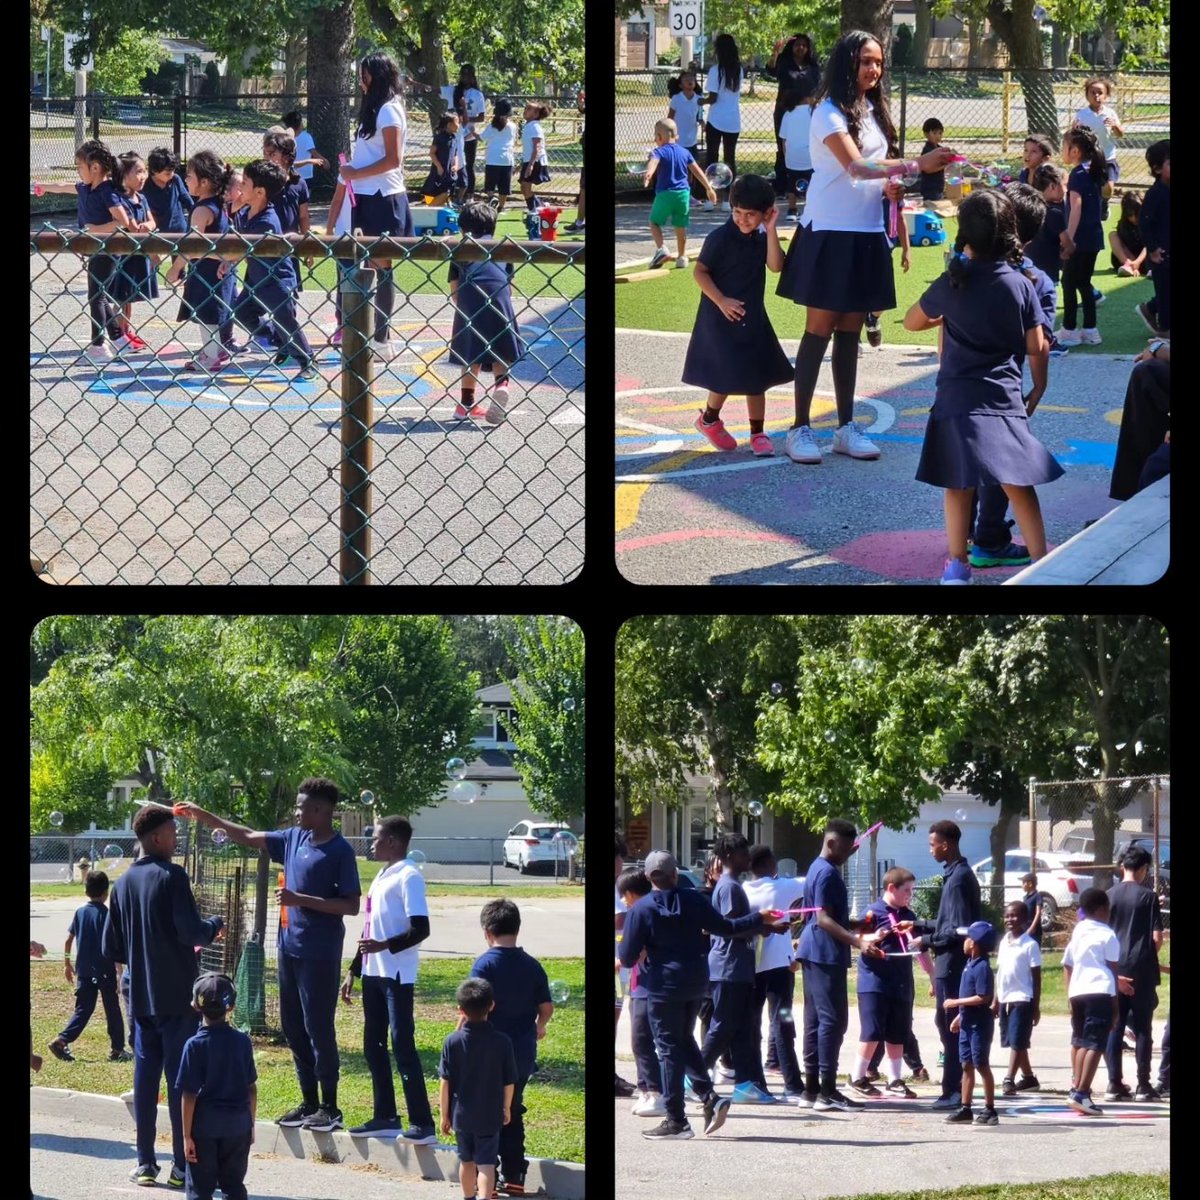 Grade 8s blowing bubbles with younger students. Learning of their leadership and influence within the school. Also, understanding the importance of community building across all grades of a school community. @TCDSB @TCDSB_Peterson  #schoolcommunity #schoolpride